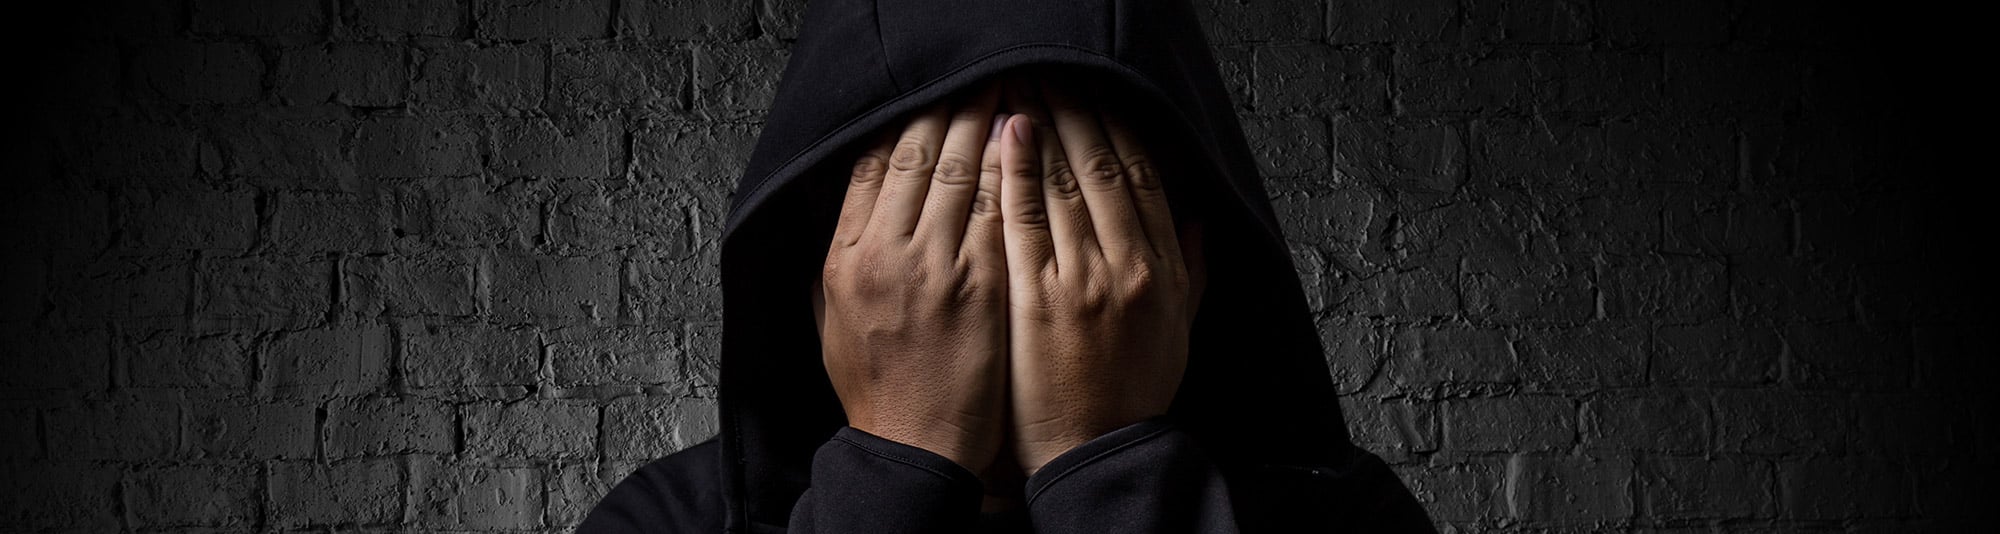 Girl in dark room with grey bricks, covers face with hands while wearing a hoodie